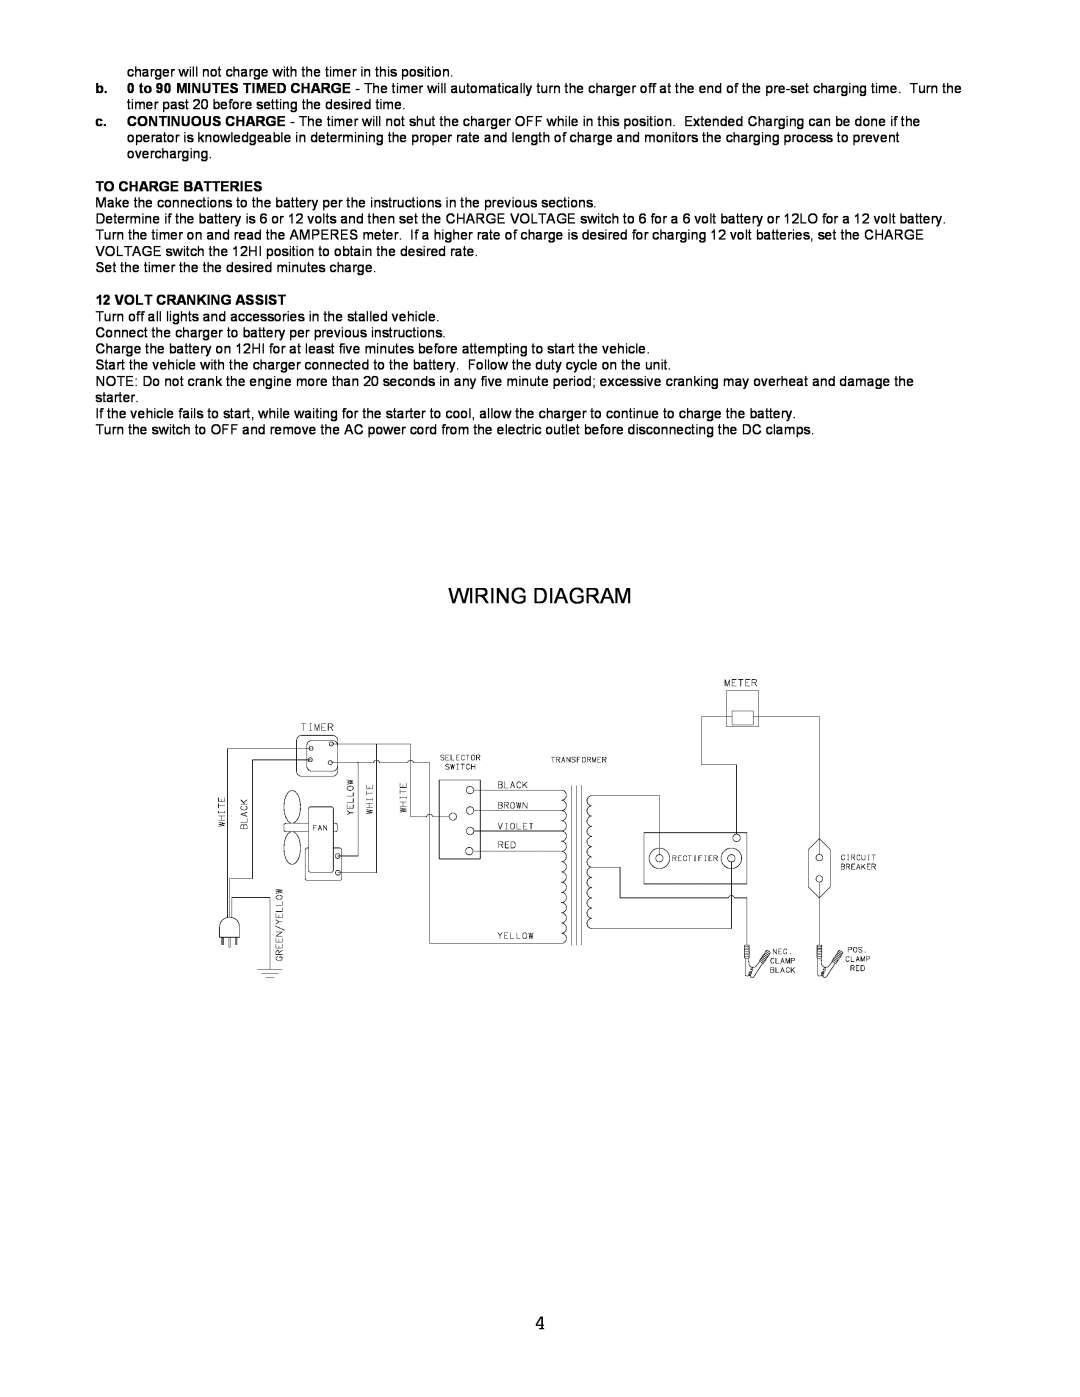 Atec BC-91009 manual To Charge Batteries, Volt Cranking Assist, Wiring Diagram 